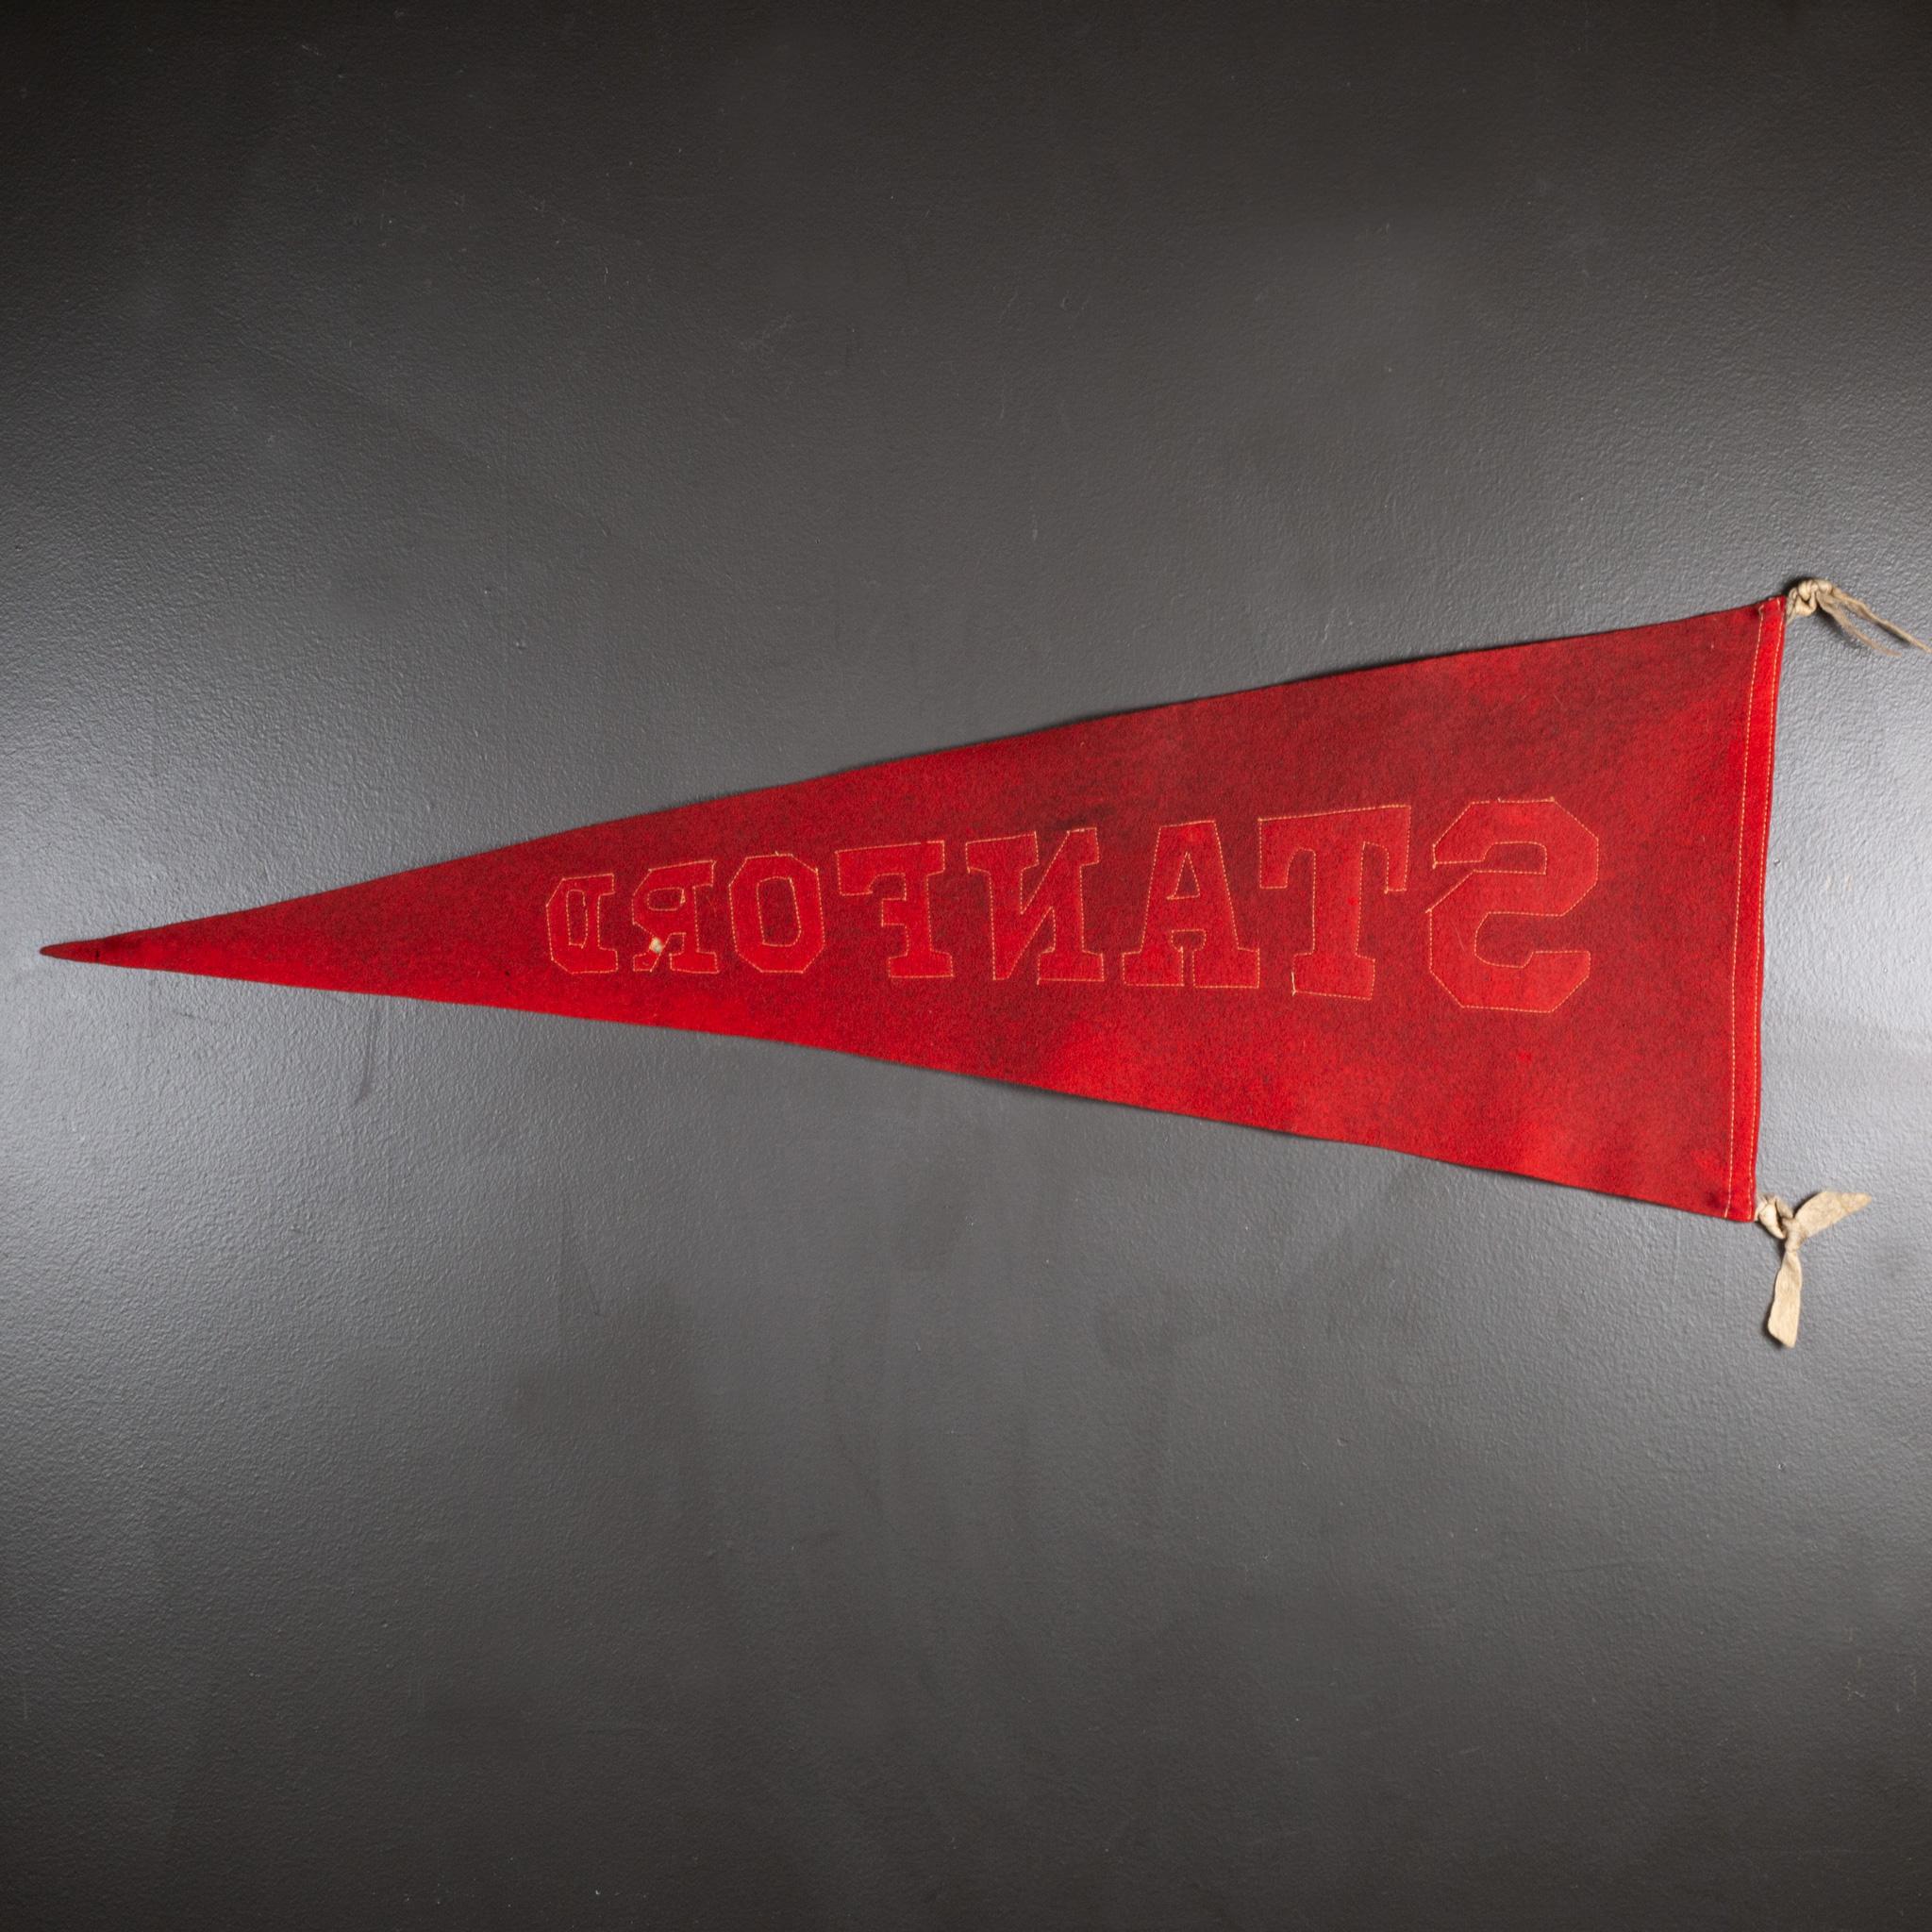 Vintage university pennant banner with sewn letters and tassels.

 CREATOR A & Co. New York, Wright & Ditson Athletic.
 DATE OF MANUFACTURE circa 1920-1940.
 MATERIALS AND TECHNIQUES Felt. 
 CONDITION Good. Wear consistent with age and use.